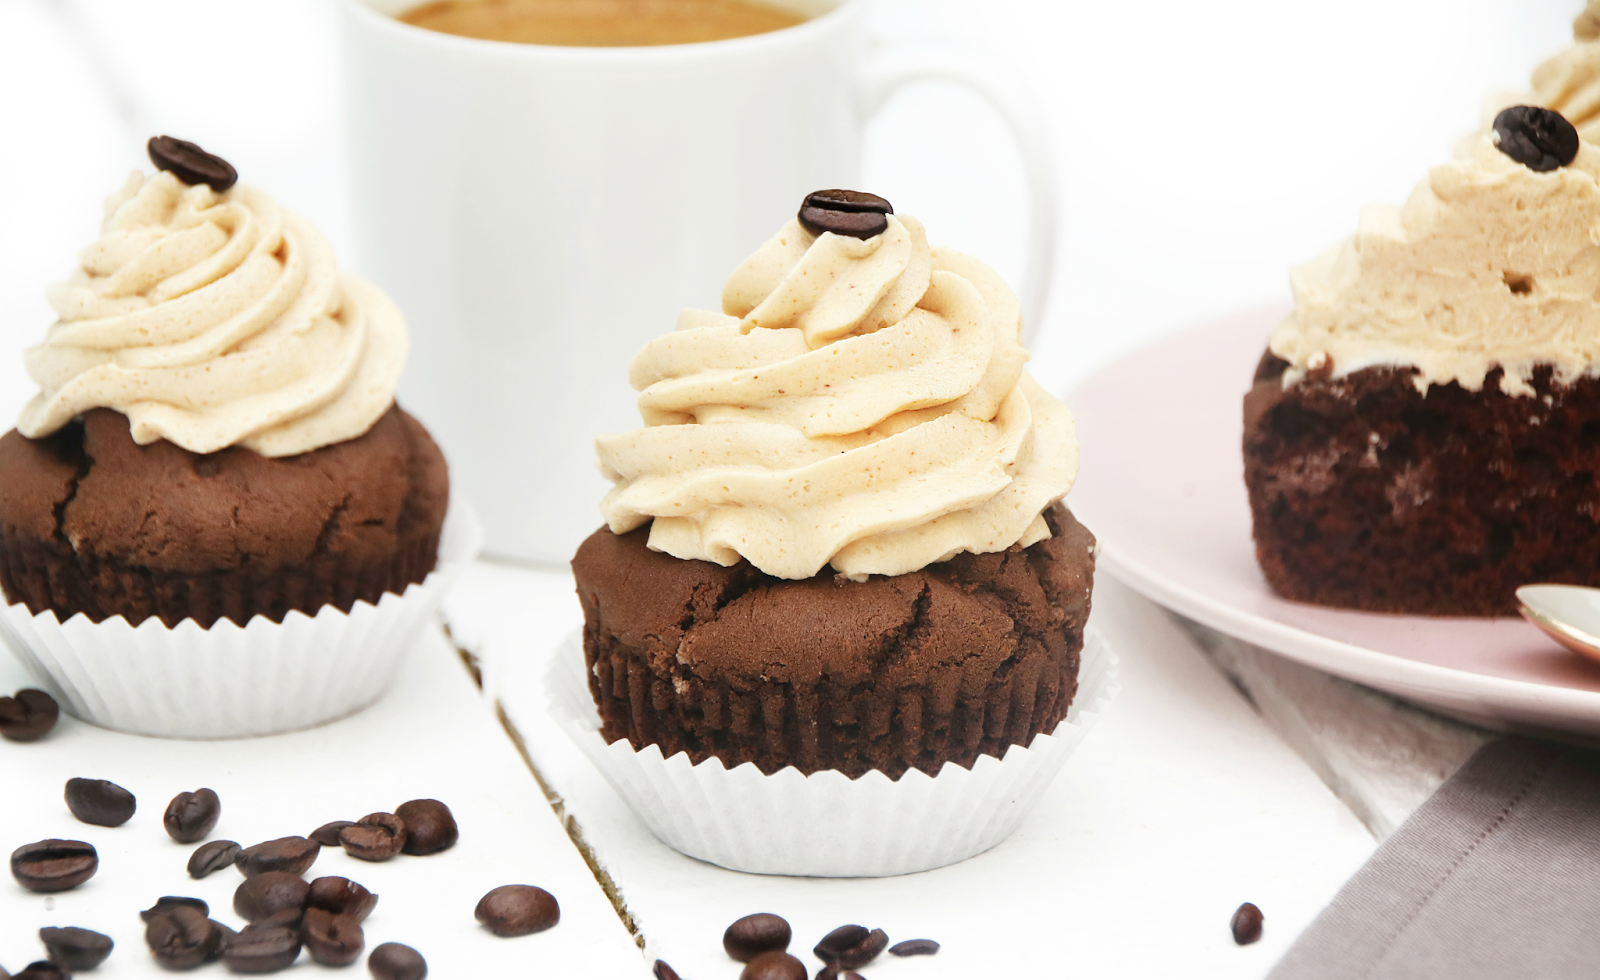 What Cake Are You? coffee cupcakes